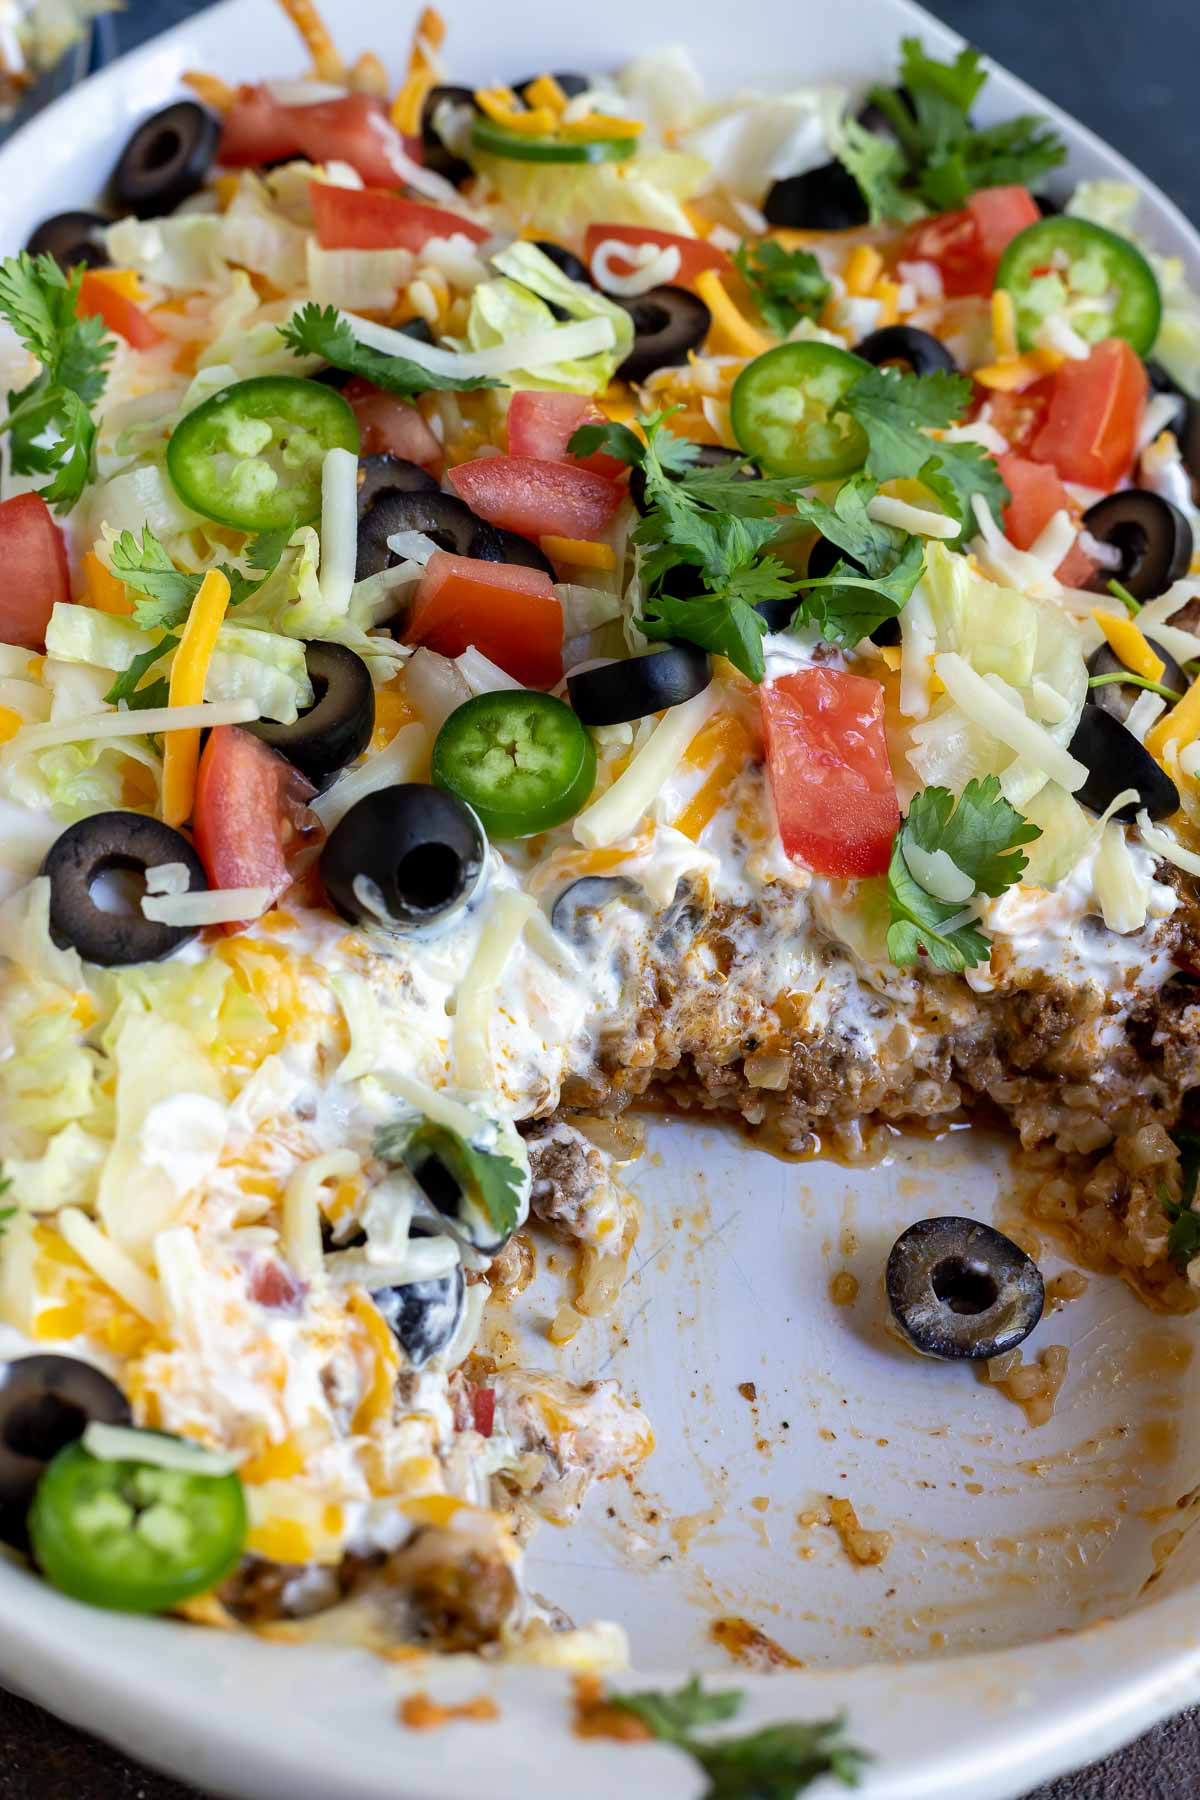 Recipes for Low Carb New Low Carb Taco Casserole Recipe Wonkywonderful